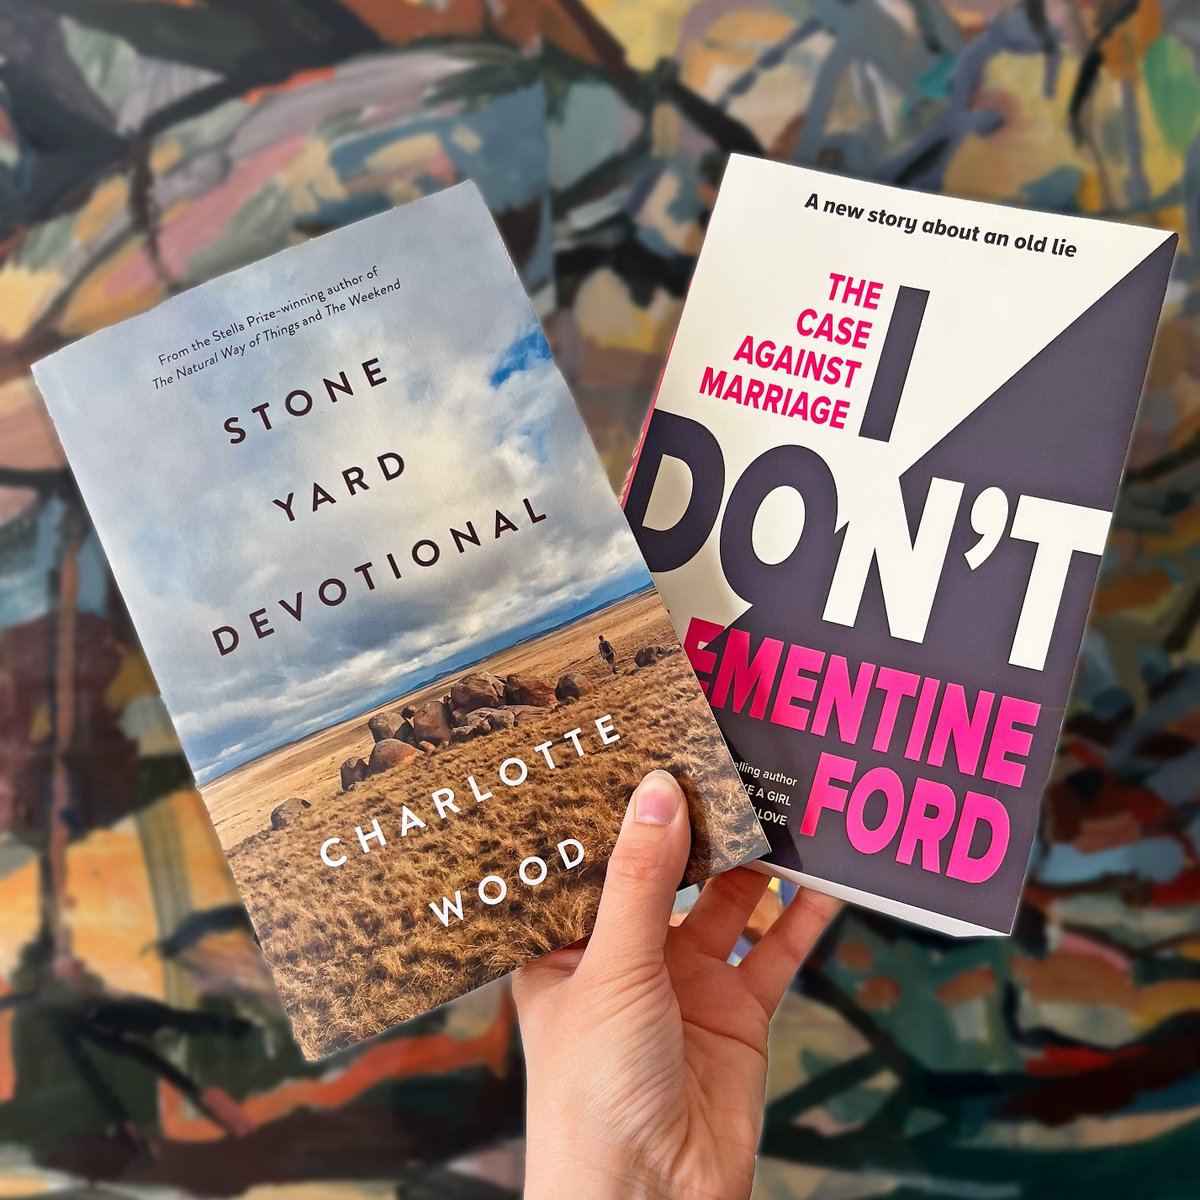 Looking for something to listen to this weekend? 🎧 Well, two of our great books get a cheeky shout out in this month's @booktopia podcast! 'Stone Yard Devotional' from Charlotte Wood and 'I Don't' from Clementine Ford. Listen to the full episode here 👉 apple.co/46UnaOf